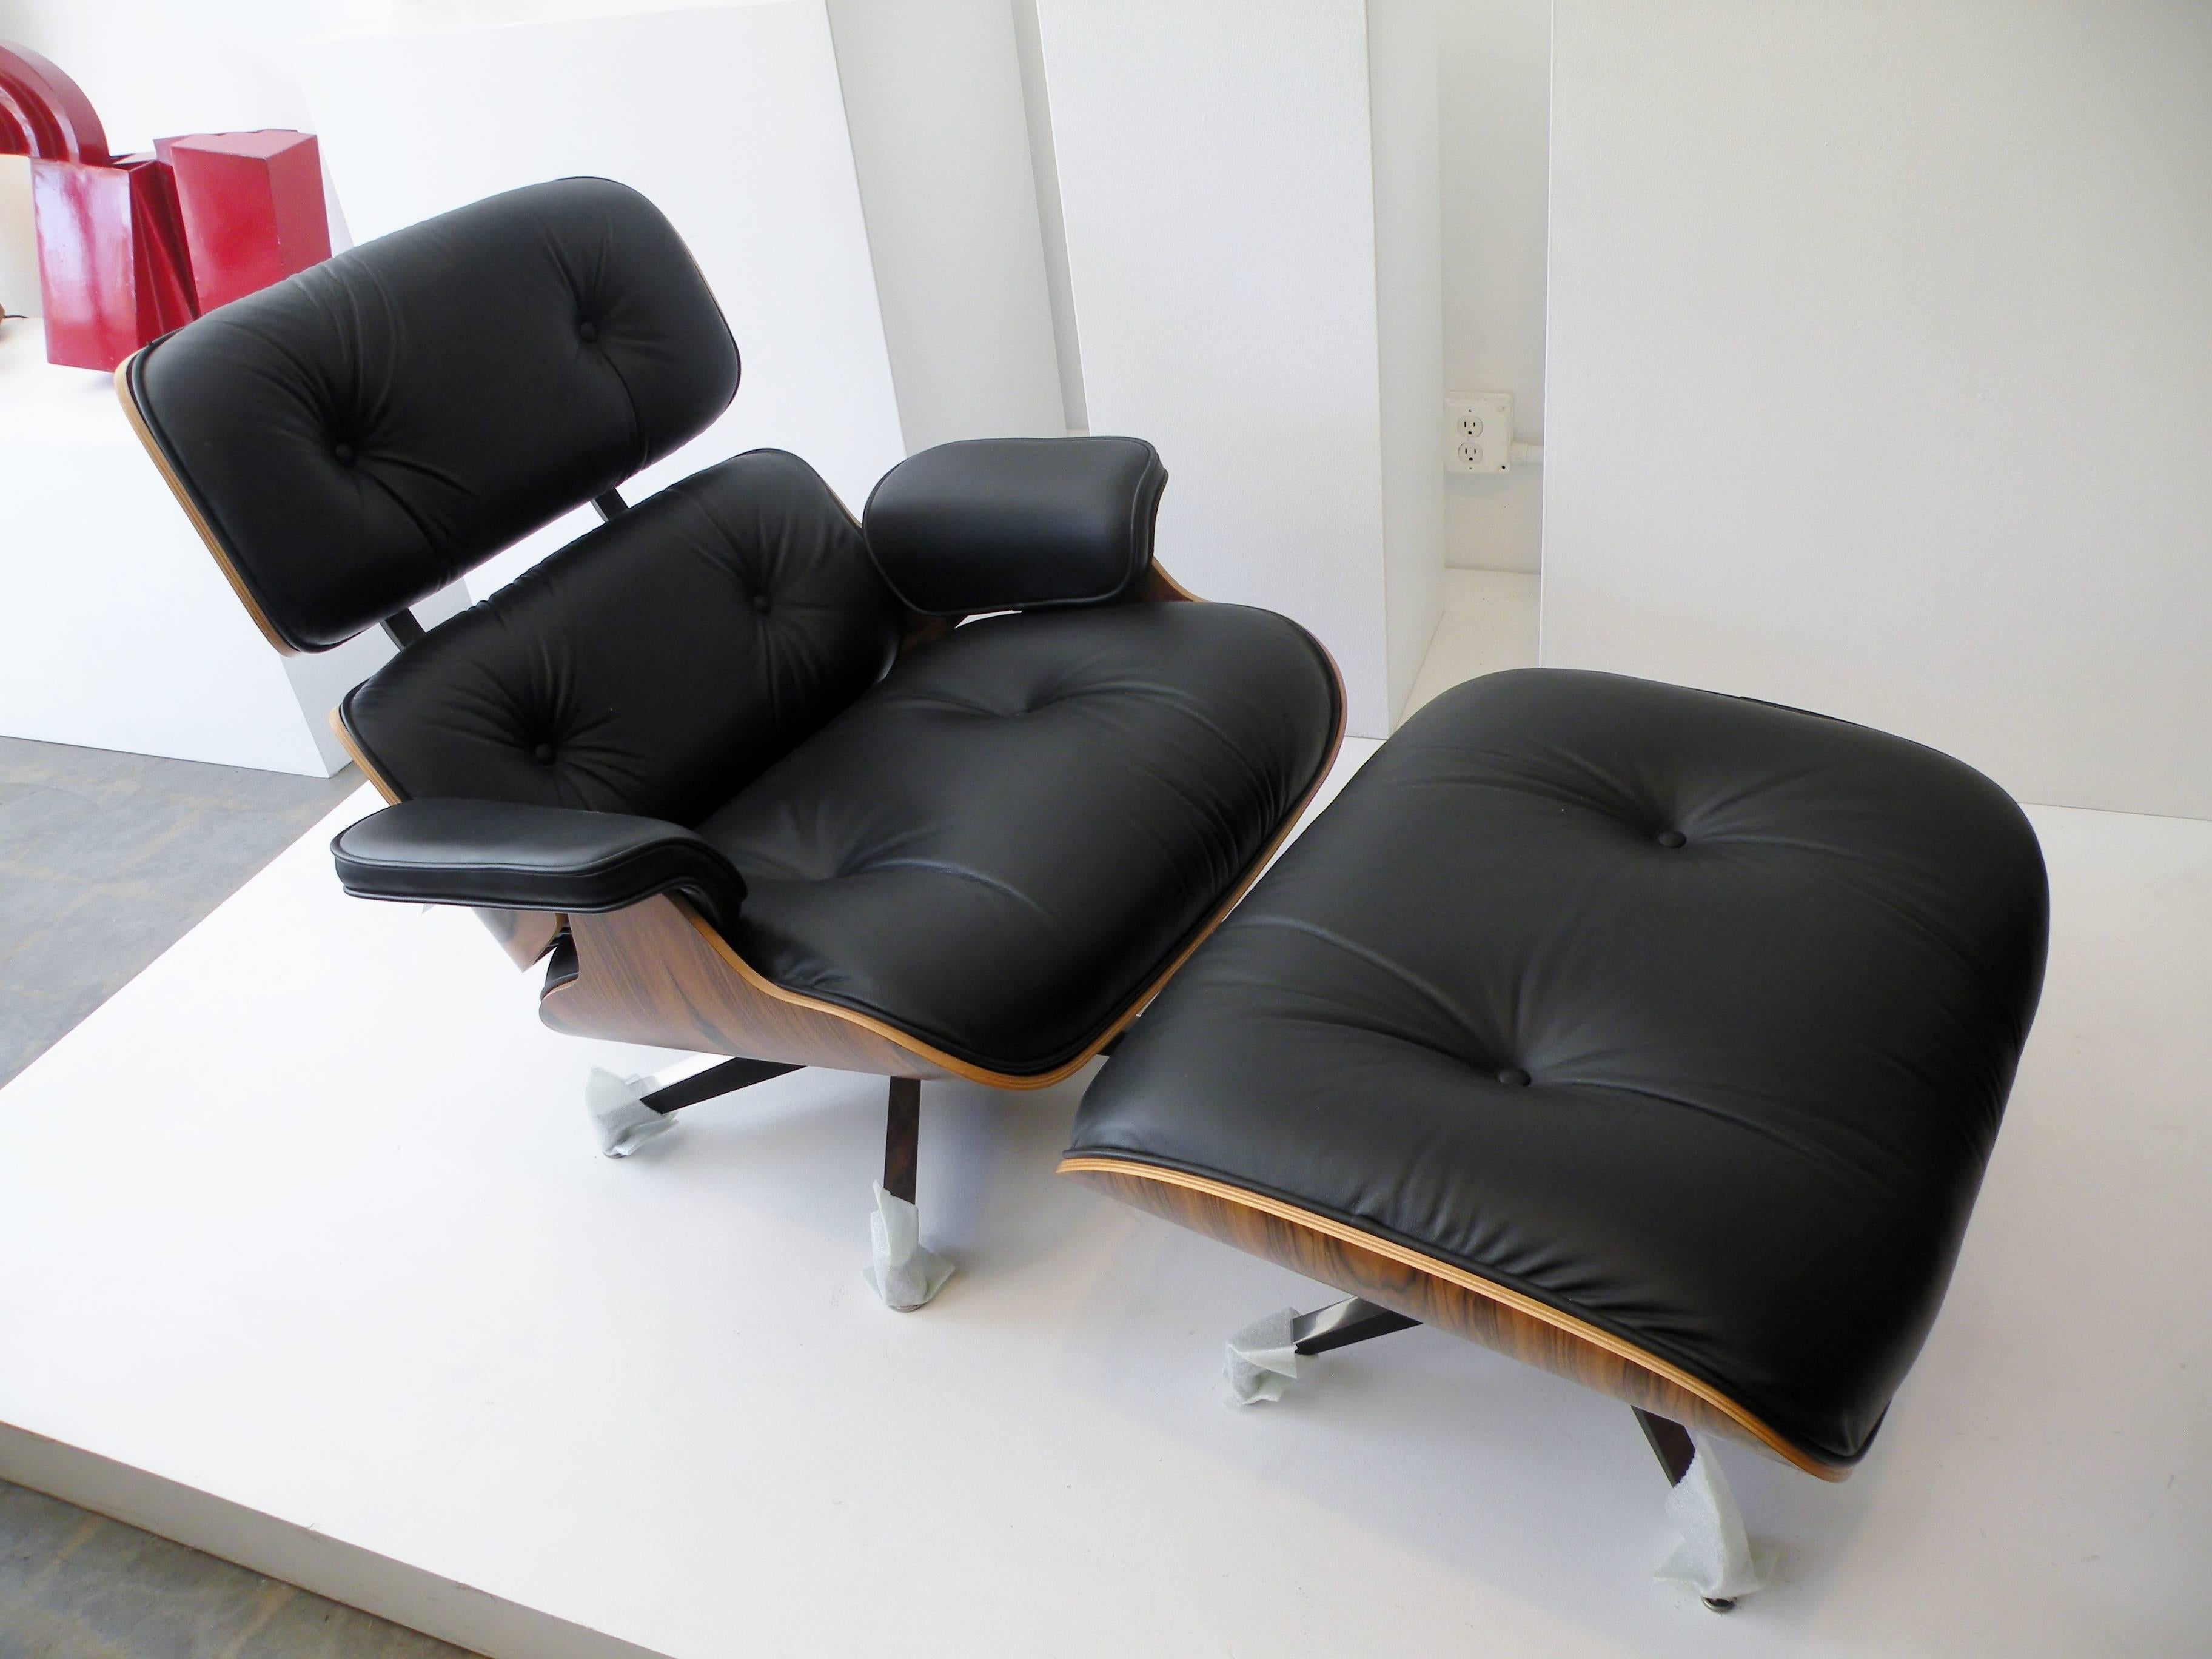 Iconic Charles and Ray Eames designed model 670 & 671 lounge chair and ottoman. Contemporary Herman Miller production, purchased and stored by previous owner. Retains original 